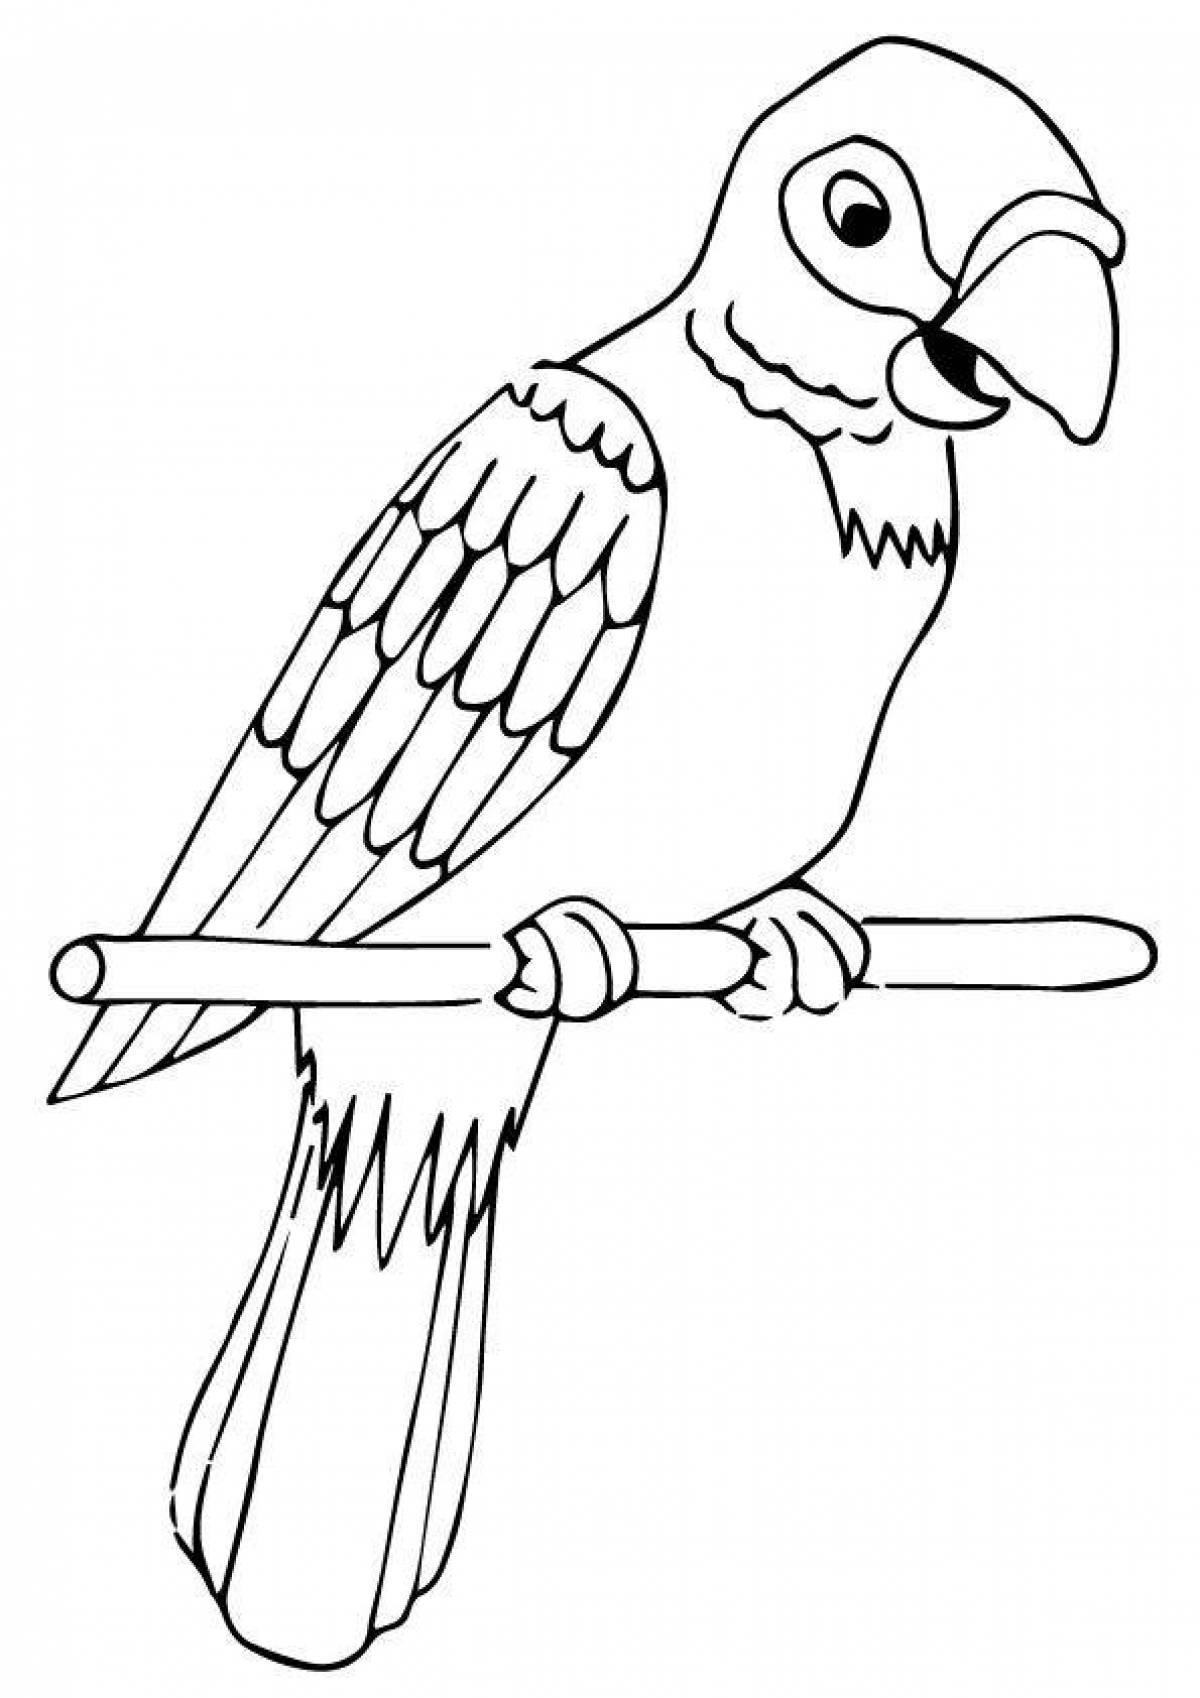 Playful parrot coloring page for kids